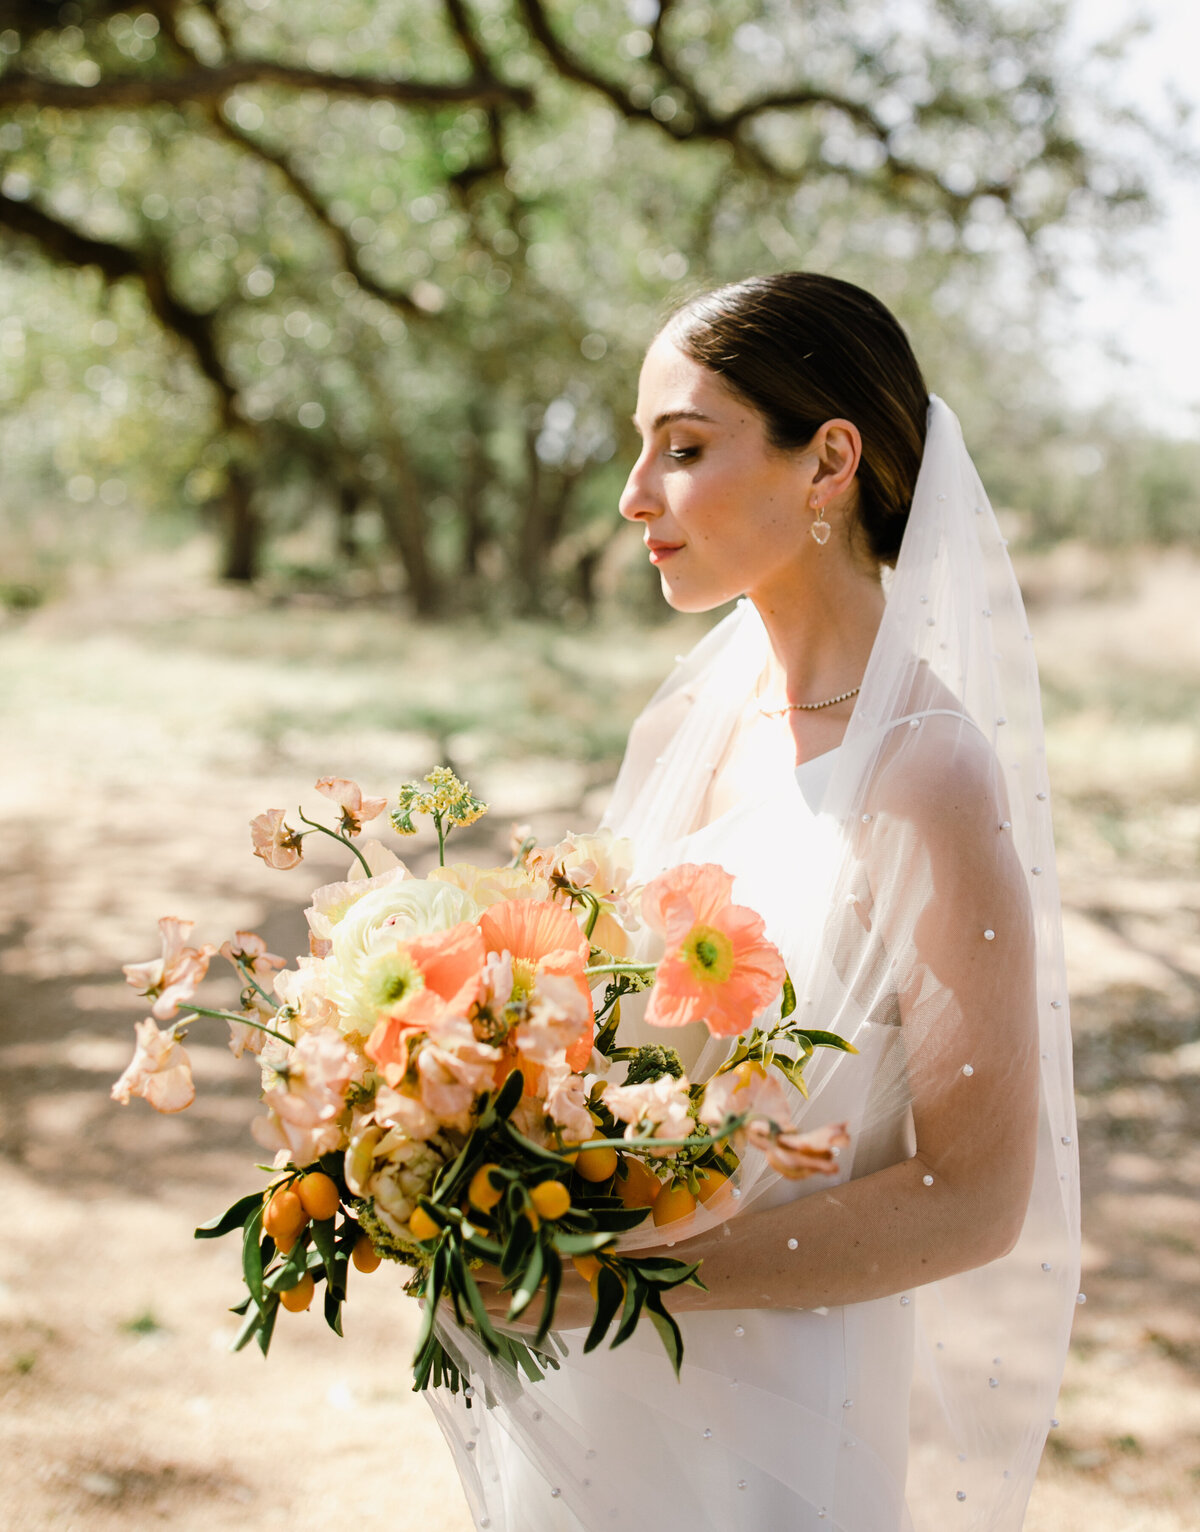 Bride holding large bouquet of orange and yellow florals